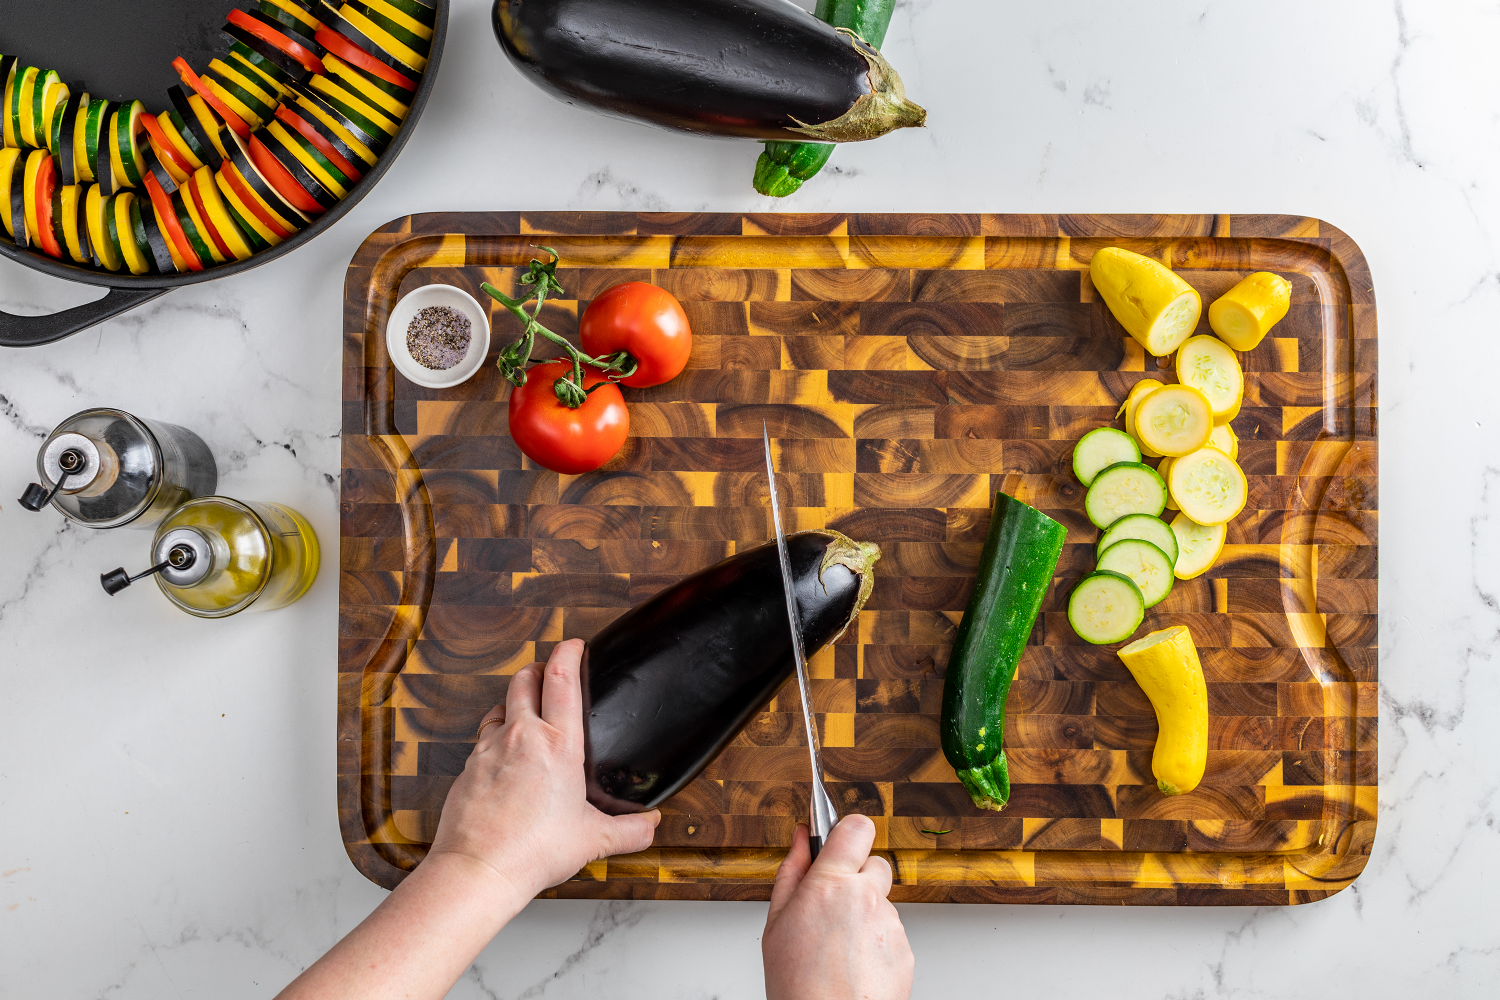 illustration of a person chopping vegetables on the acacia end grain board with juice groove next to salt and pepper grinders and pan filled with sliced veggies on a white countertop